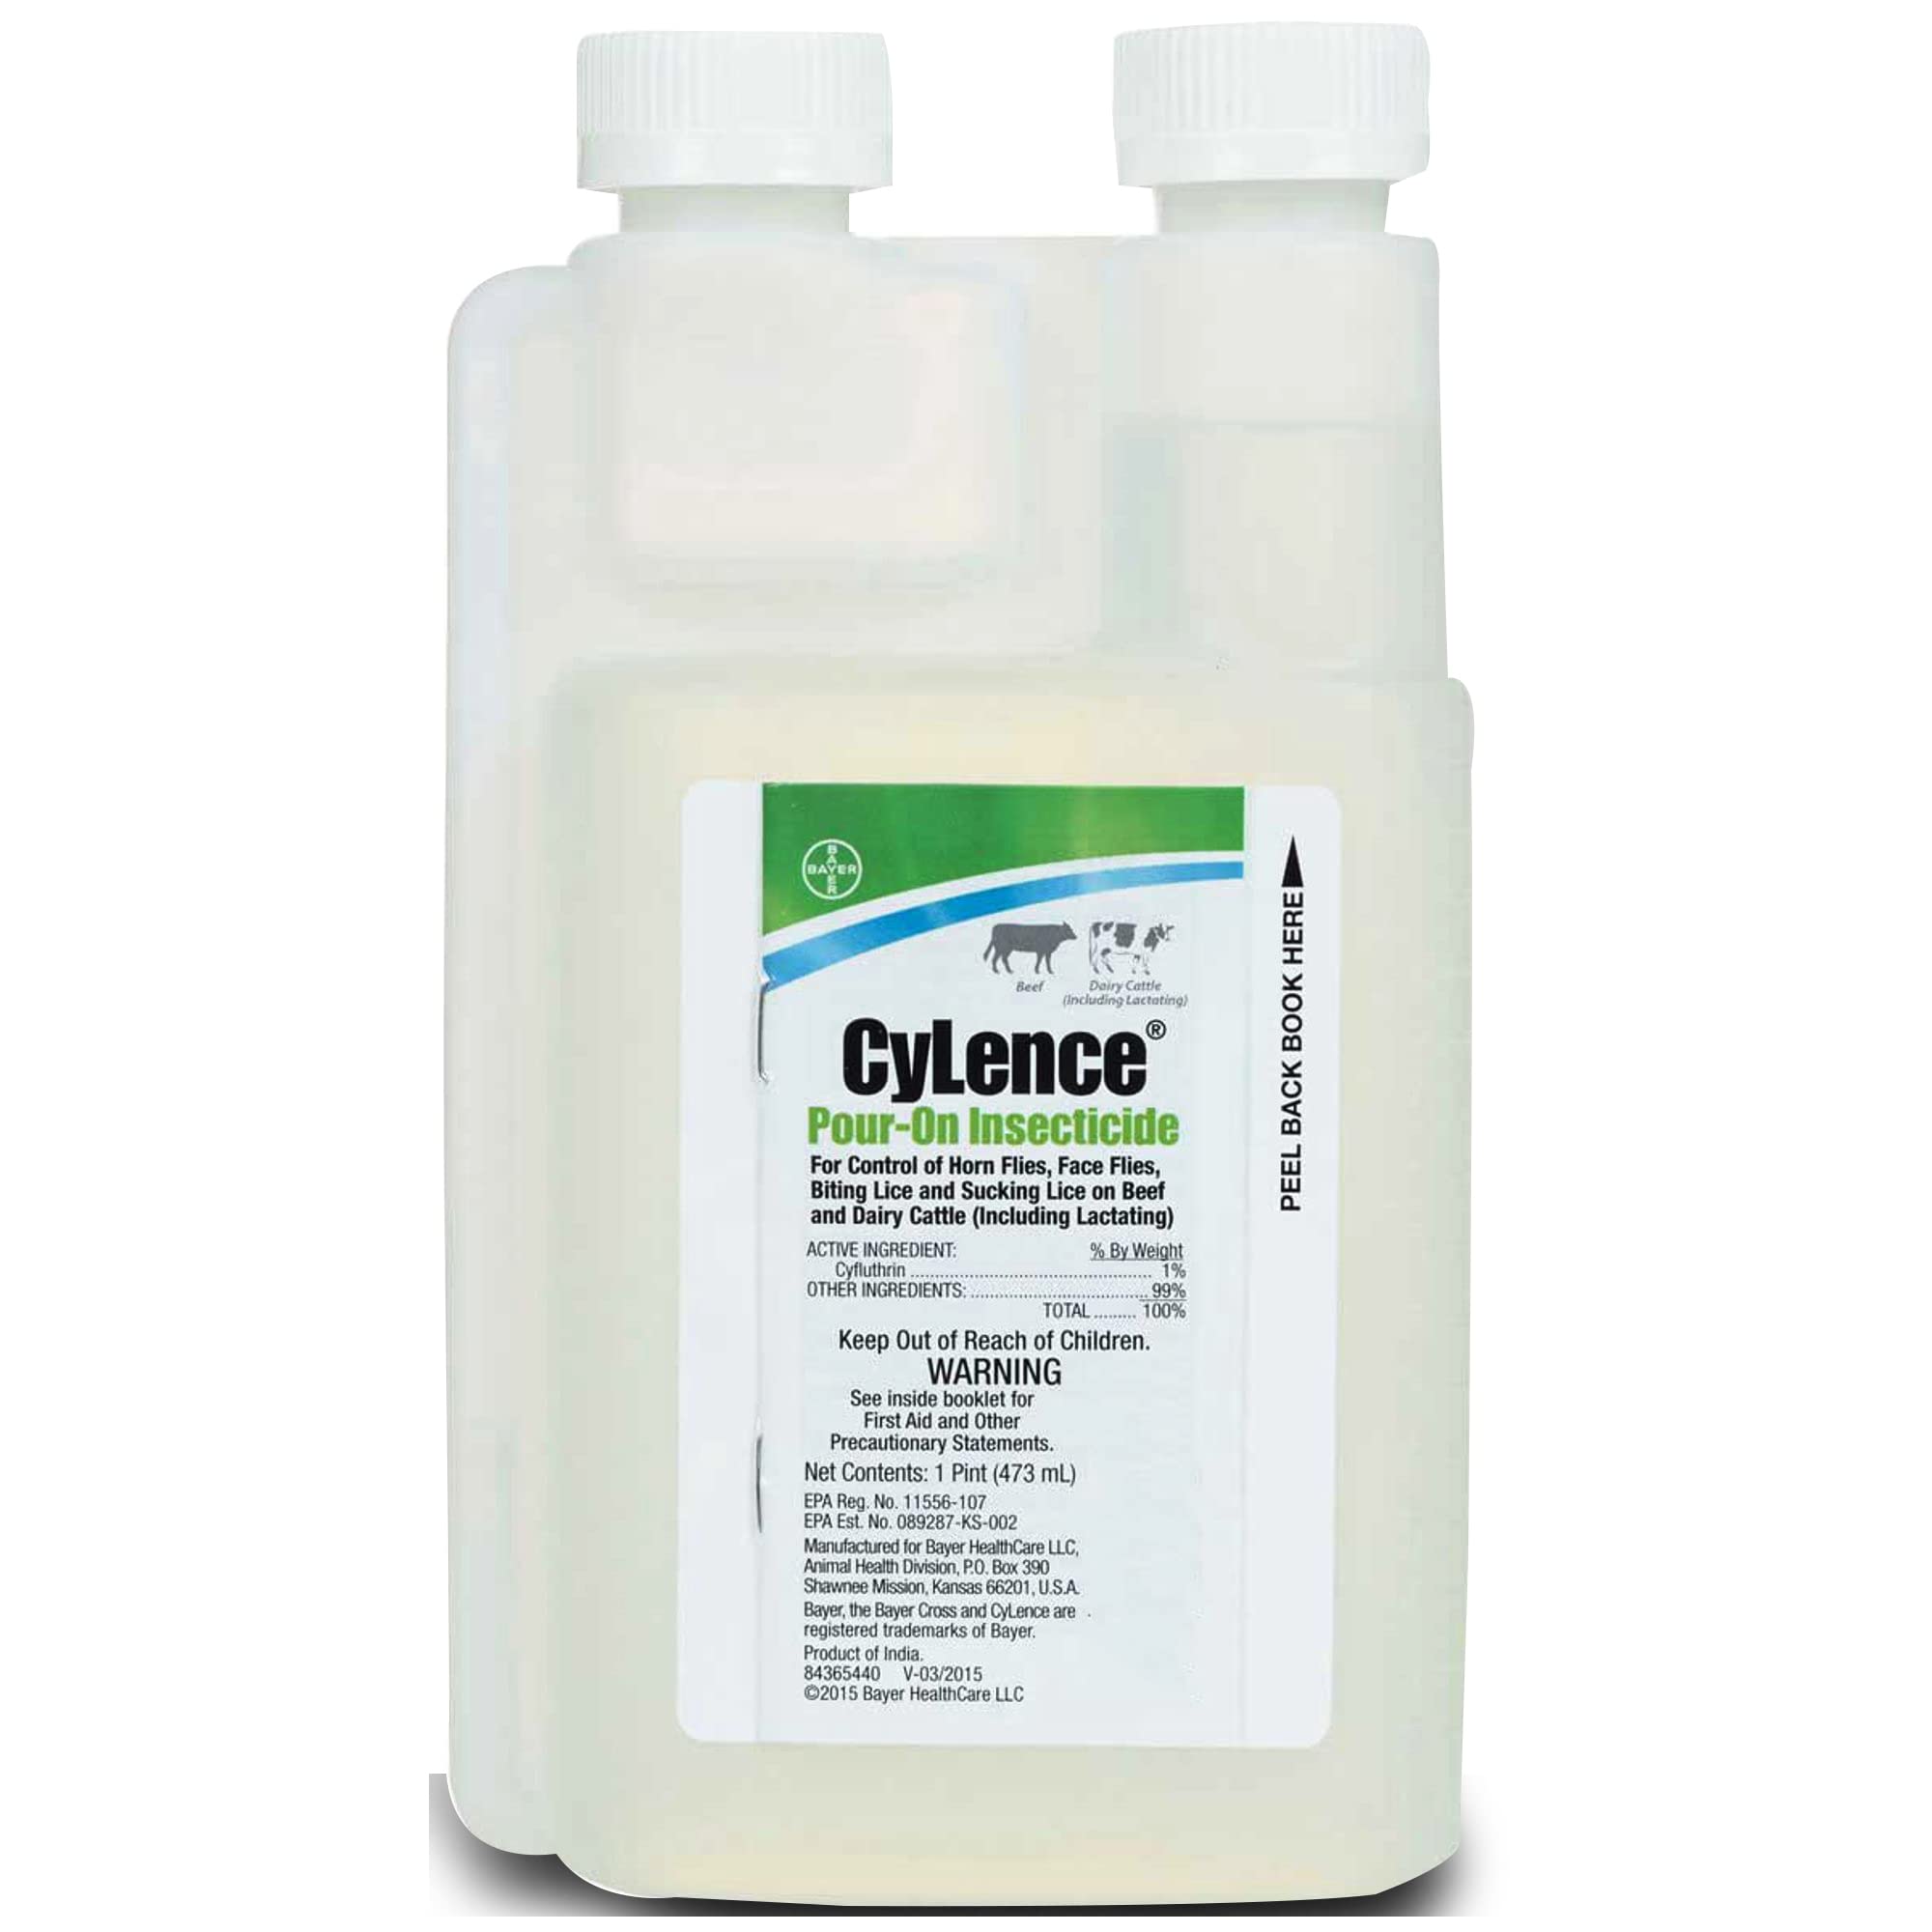 Cylence Pour-On Insecticide - Fly Control for Cattle-Cattle Insecticide-Bayer Insecticide-Insecticide for Carpenter Bees -Cattle Fly Control - Available with Premium Quality Centaurus AZ Gloves-1pt